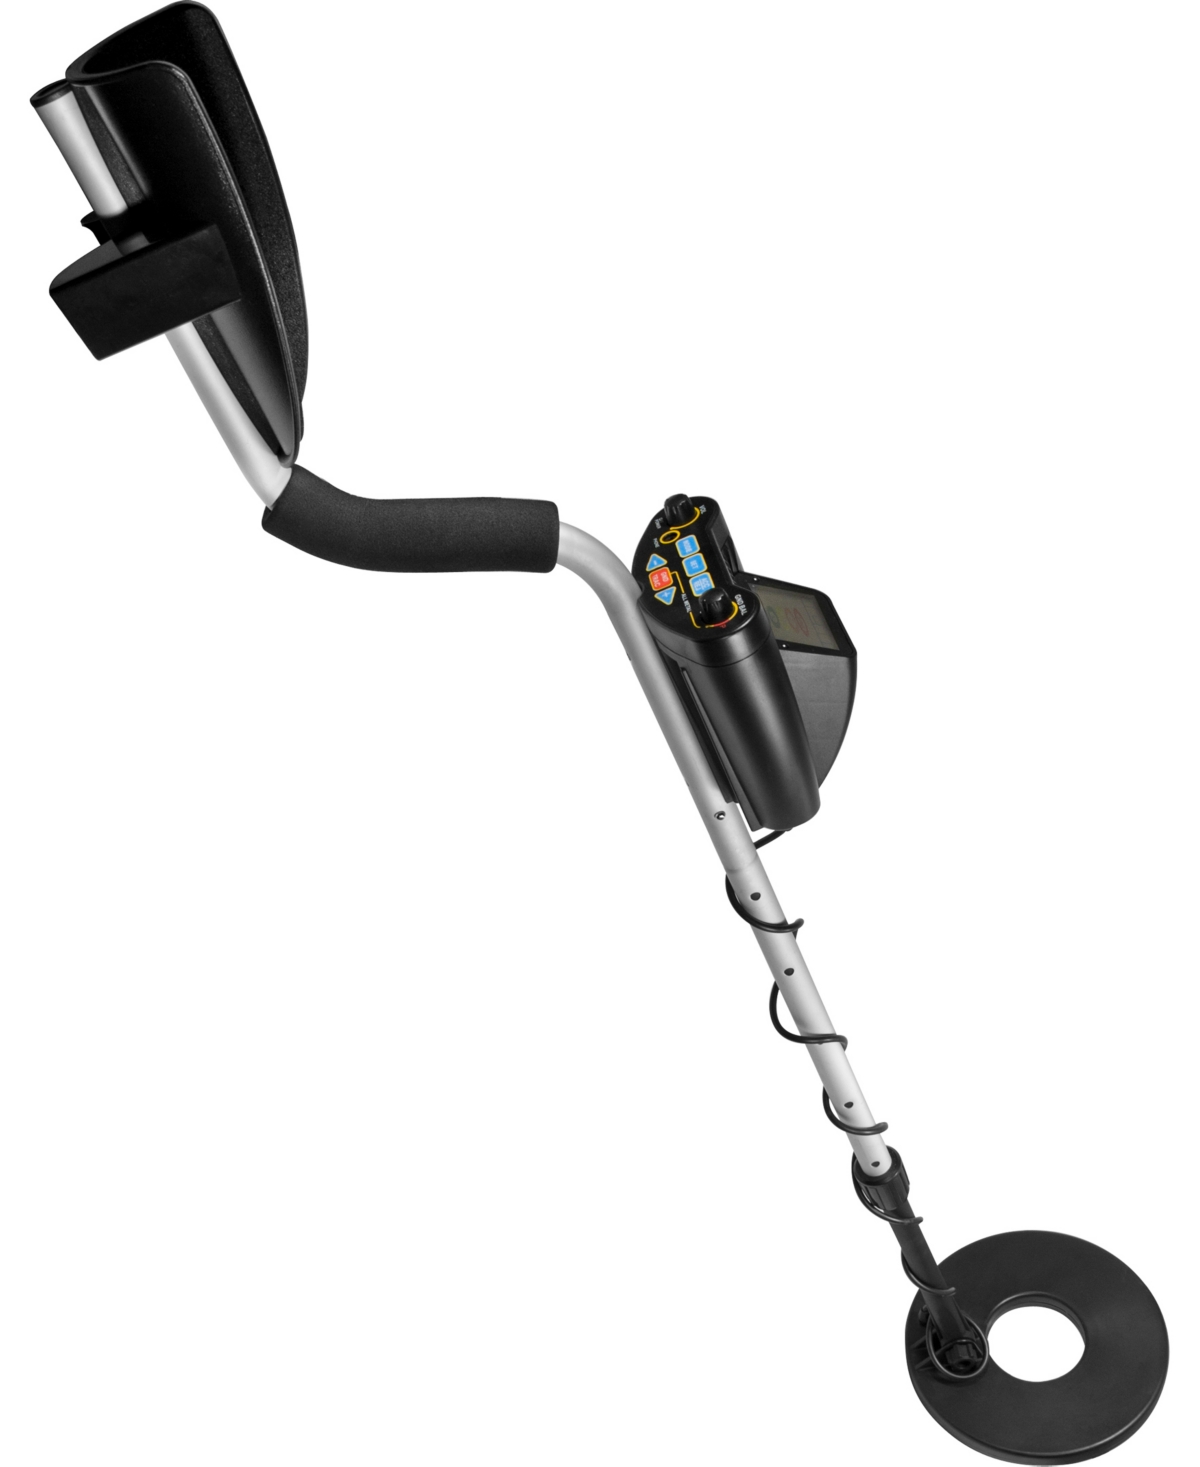 Barska Sharp Edition Metal Detector, With Carrying Case In Black